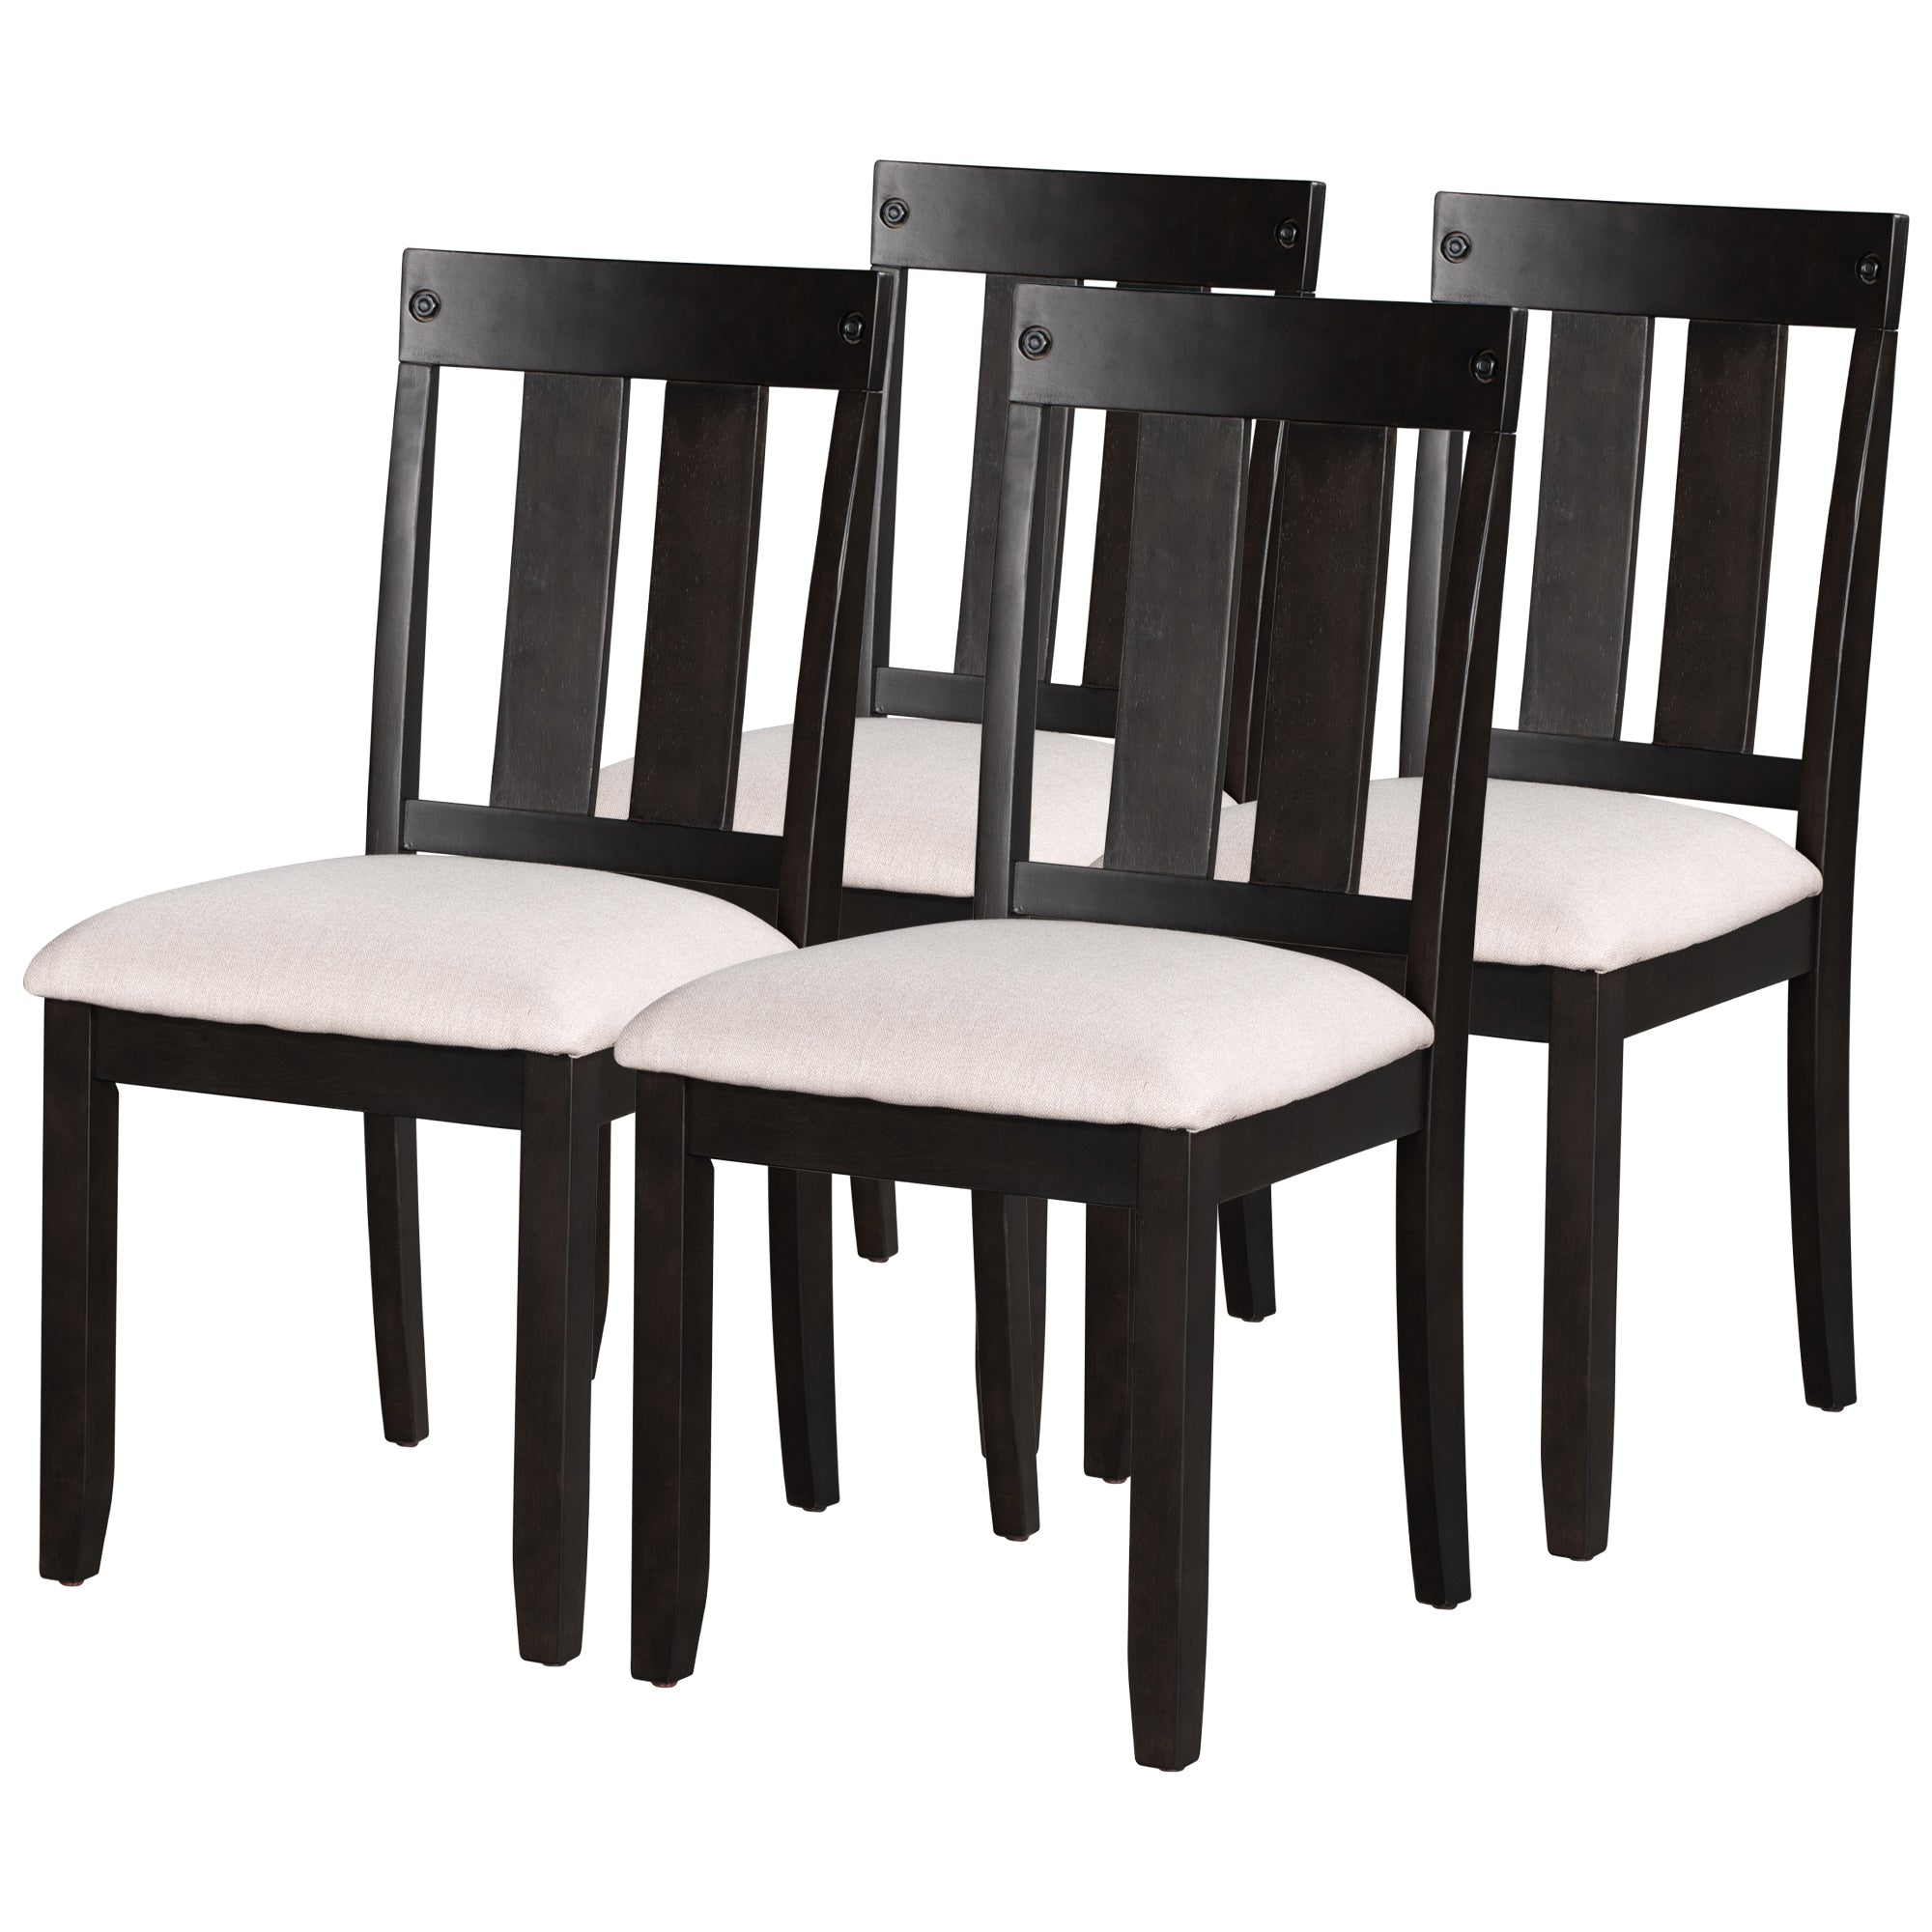 TREXM Rustic Farmhouse 6-Piece Wooden Rustic Style Dining Set, Including Table, 4 Chairs & Bench (Espresso)